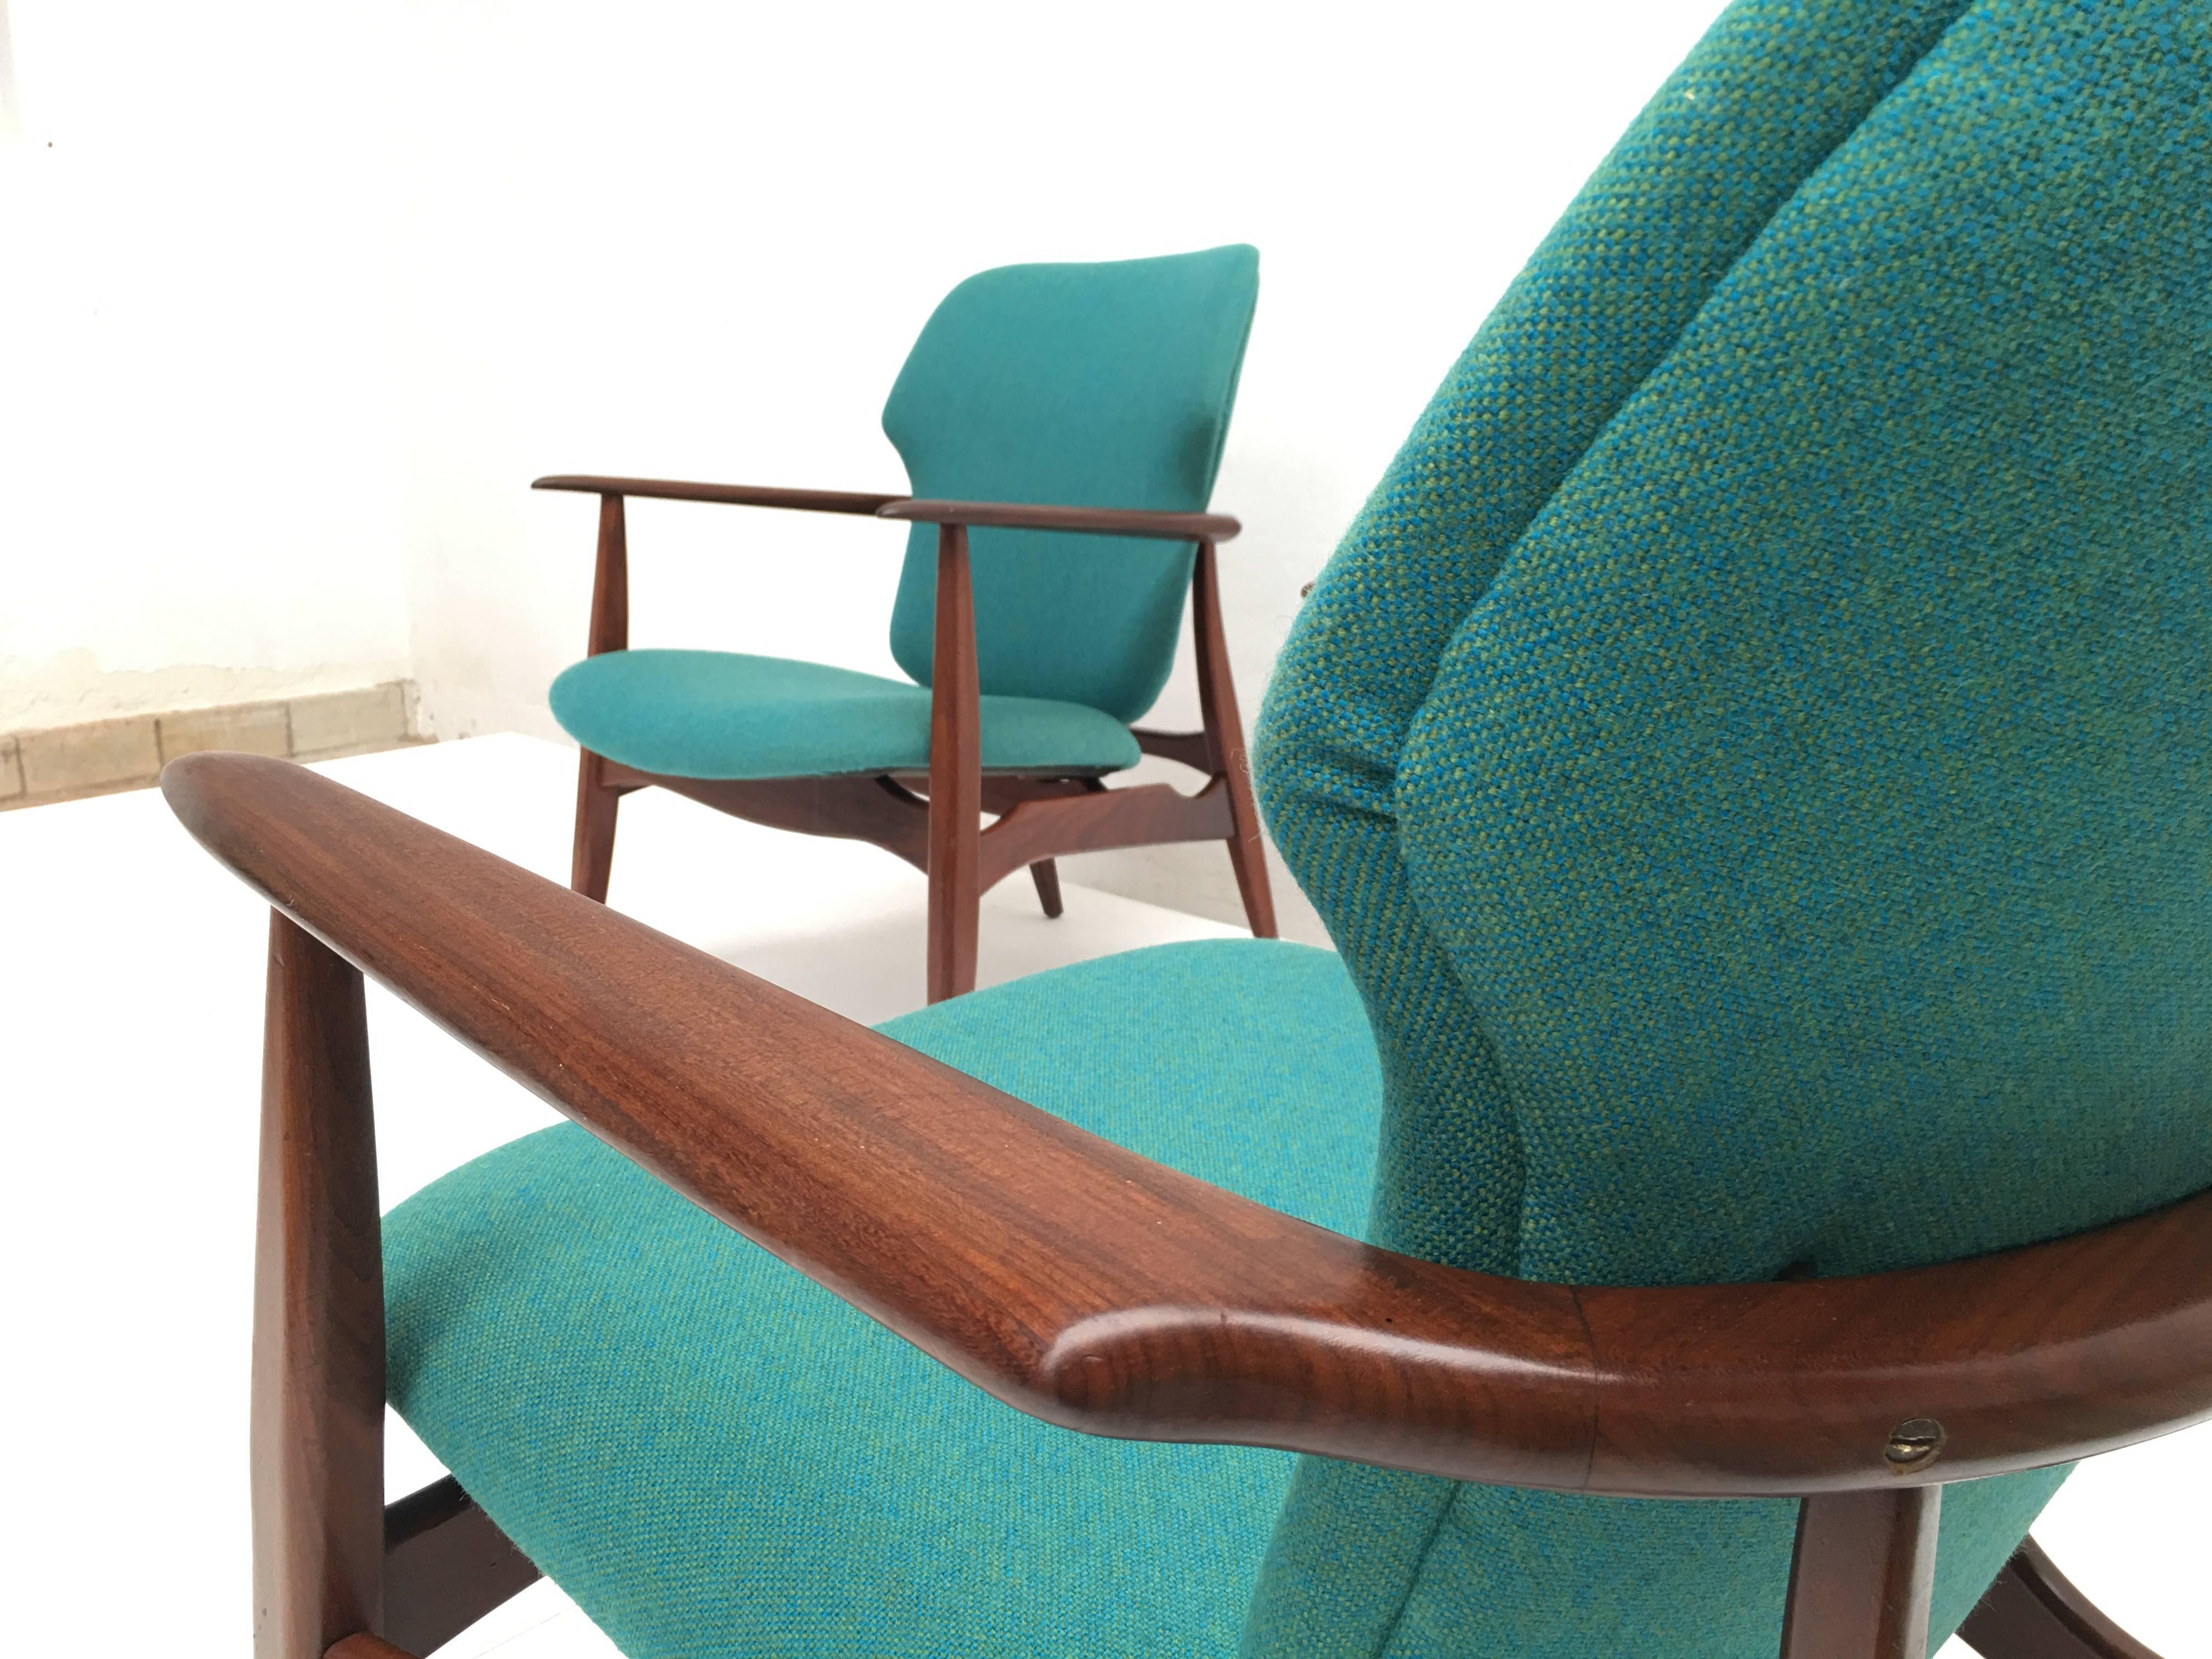 Stunning set of lounge chairs totally fully restored with new foam and De Ploeg Wool upholstery in a blue/green melange (see detail photo 7)

Design is by Aksel Bender Madsen and they were produced in Denmark to be distributed by Dutch firm